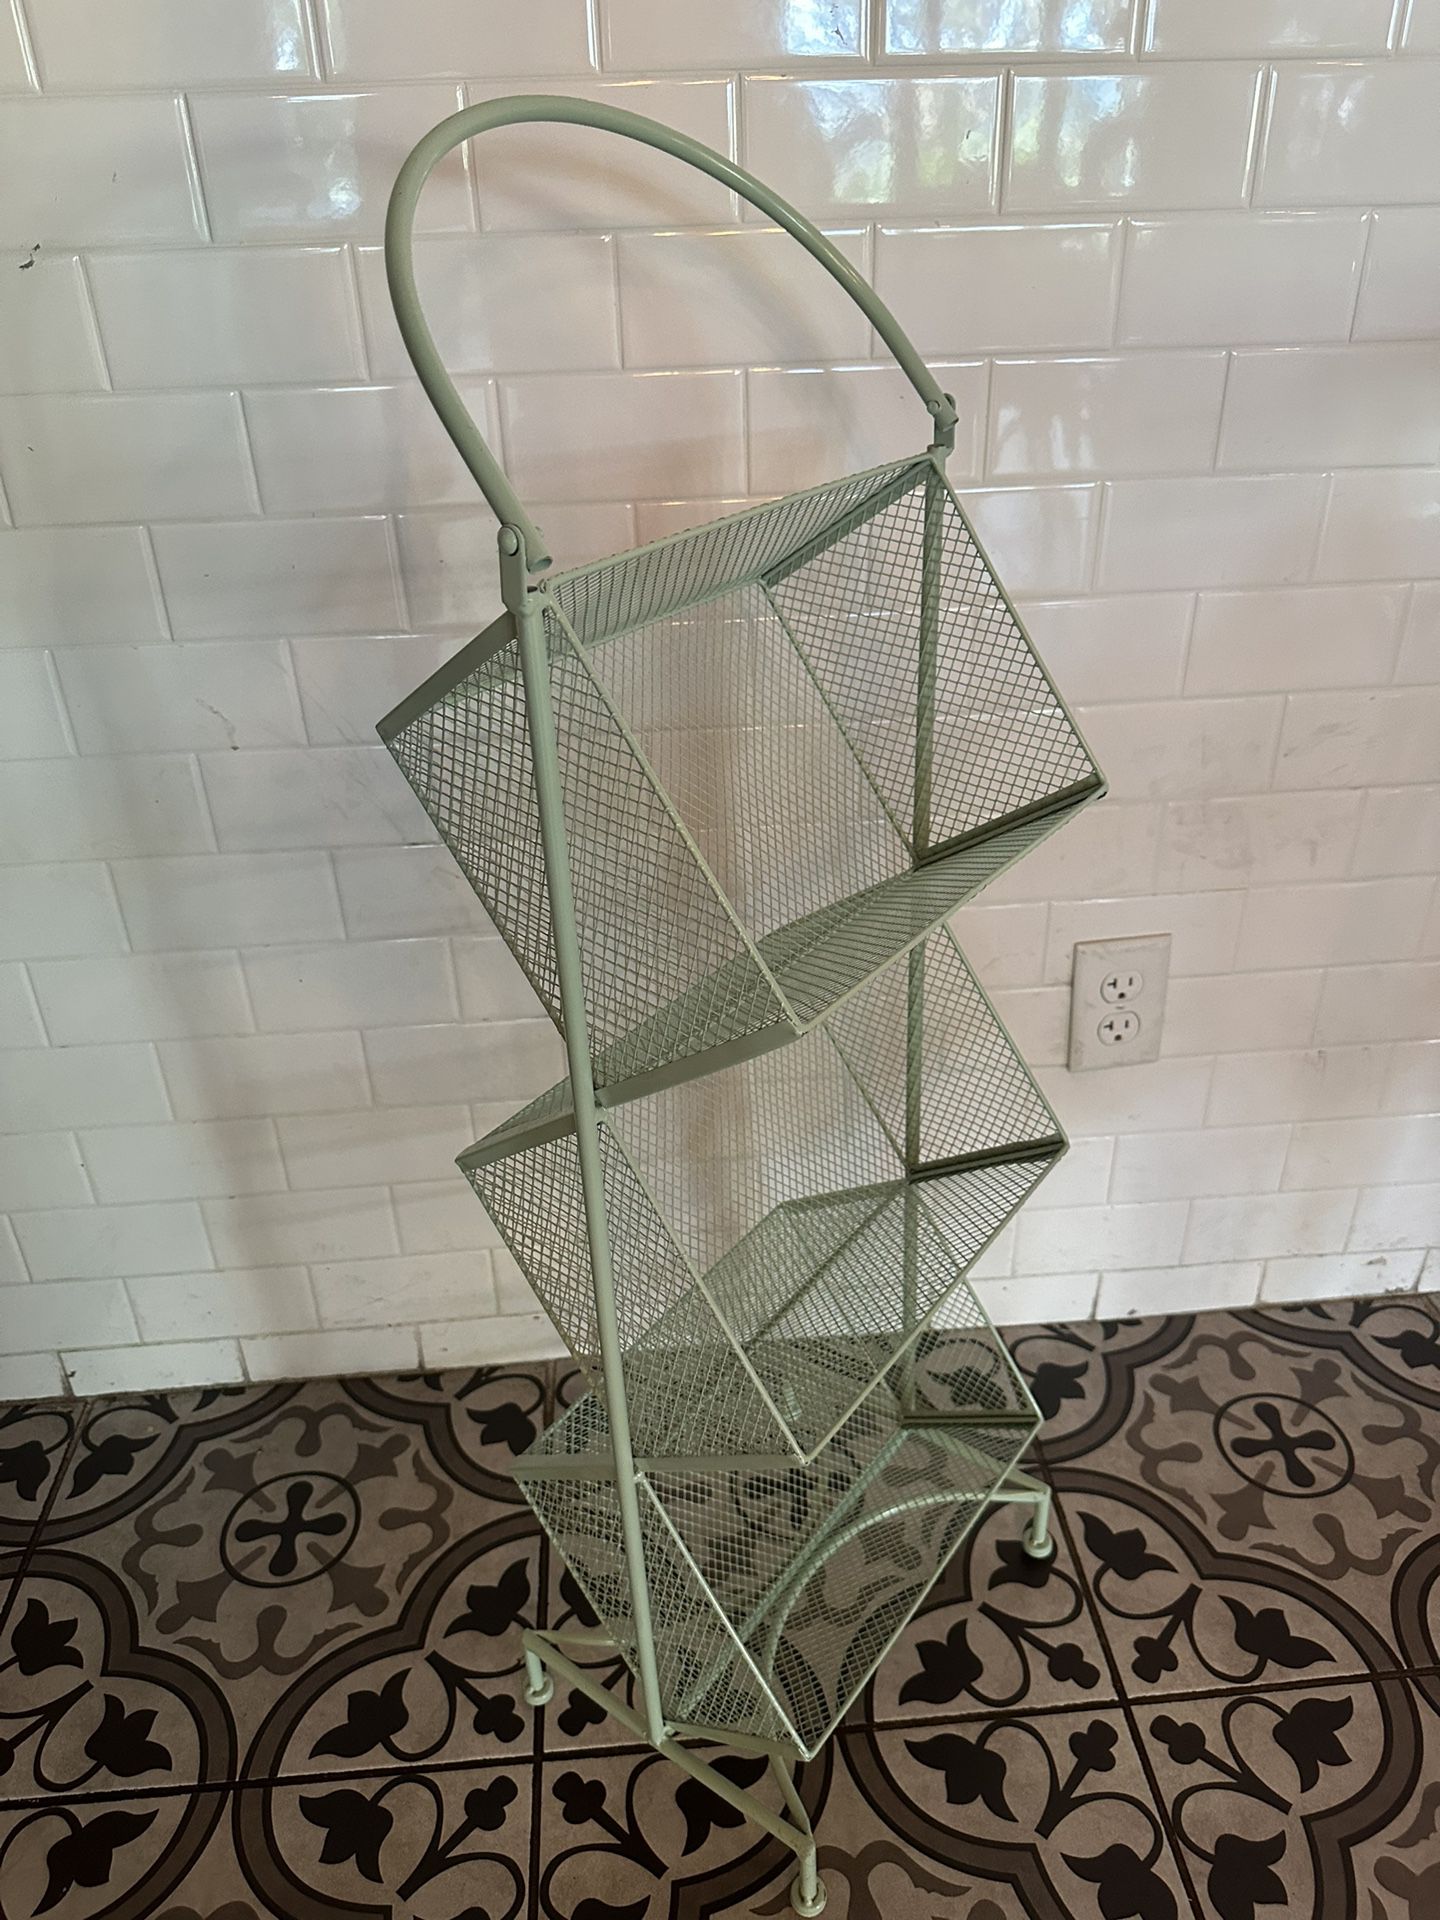 3 Tier Metal Mesh Stand With Baskets For Storage And Organization 